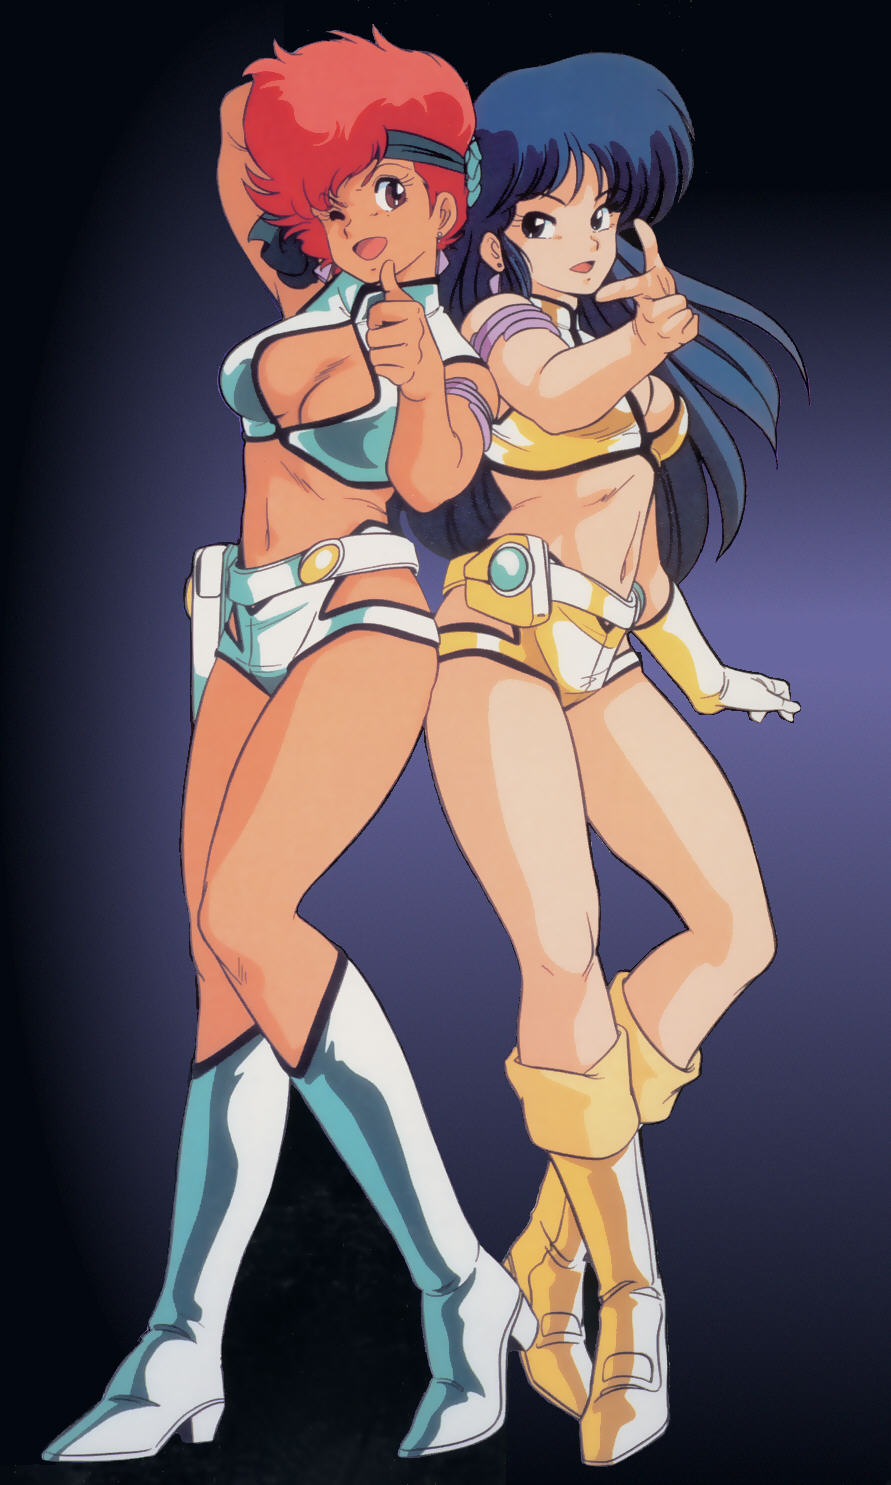 Dirty Pair image - Anime Fans of modDB.